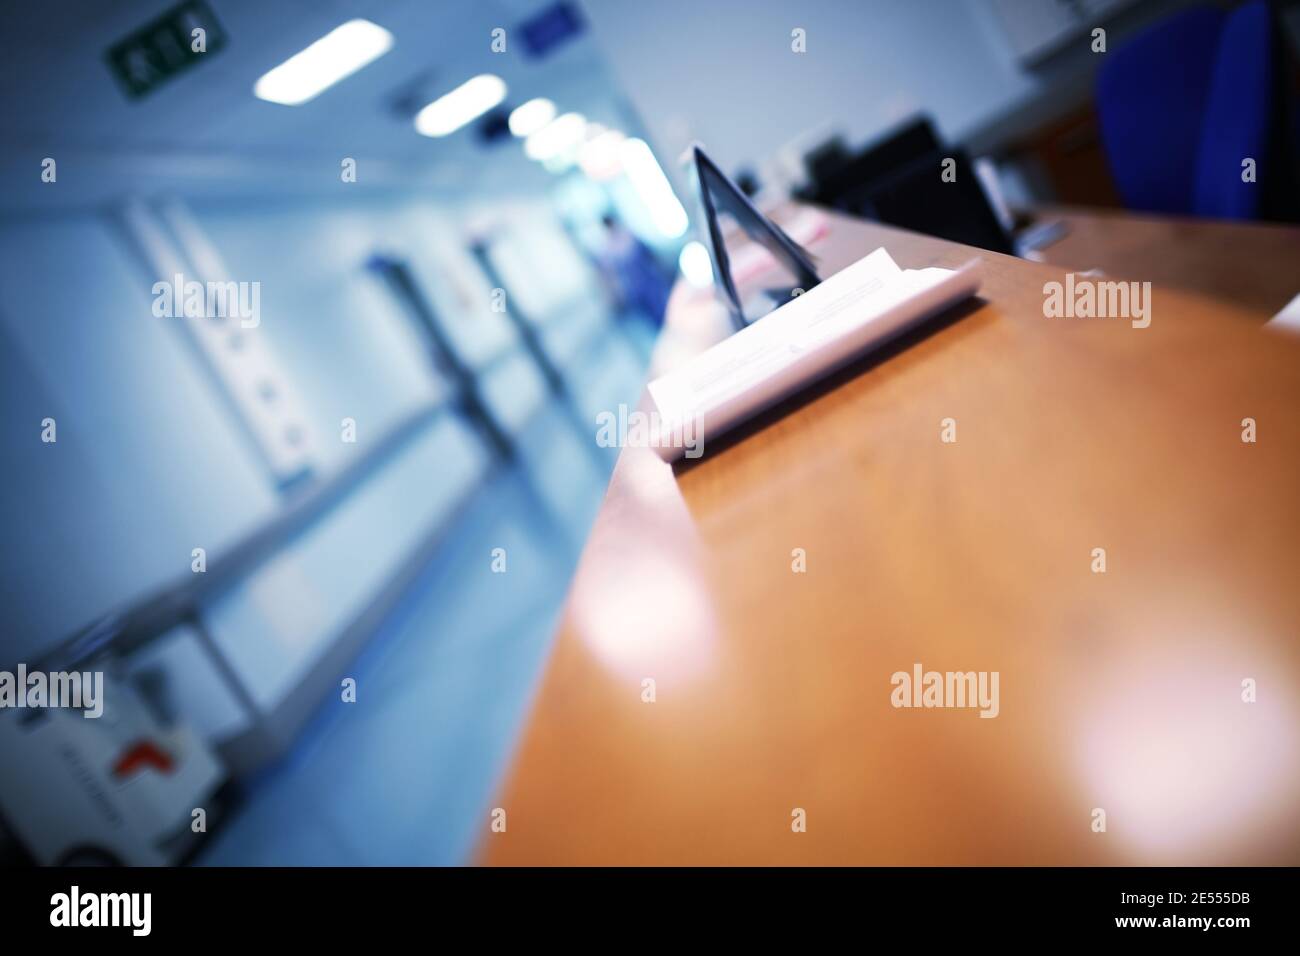 Hospital reception with blurred silhouette. Stock Photo